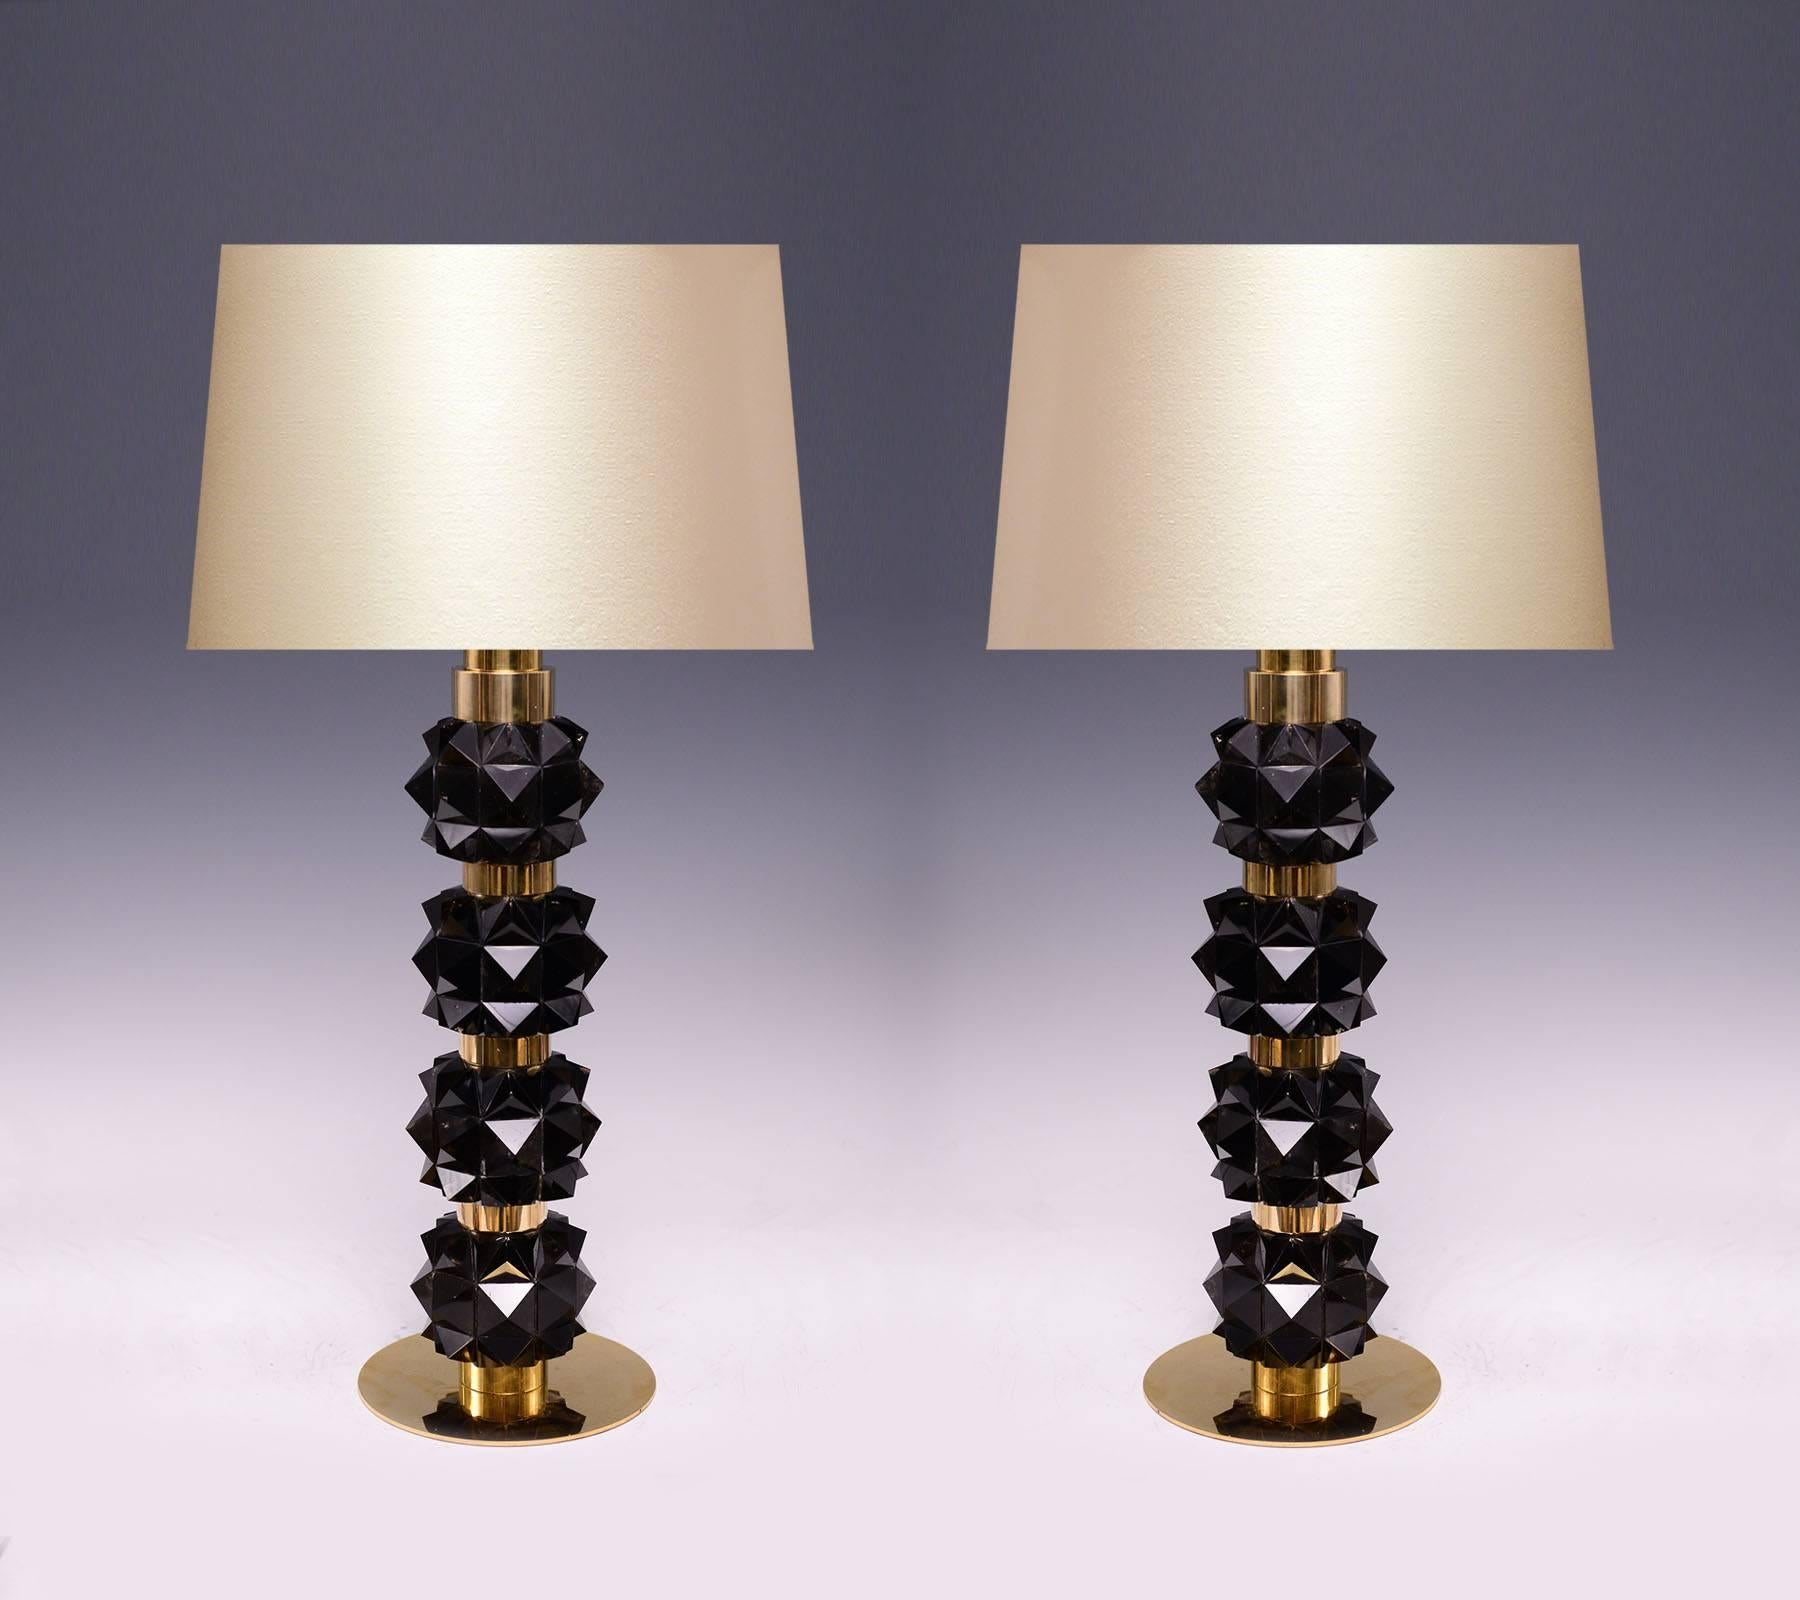 A pair of fine rock candy dark rock crystal quartz lamps with polished brass decorations, created by Phoenix gallery.
Lampshade not included.
